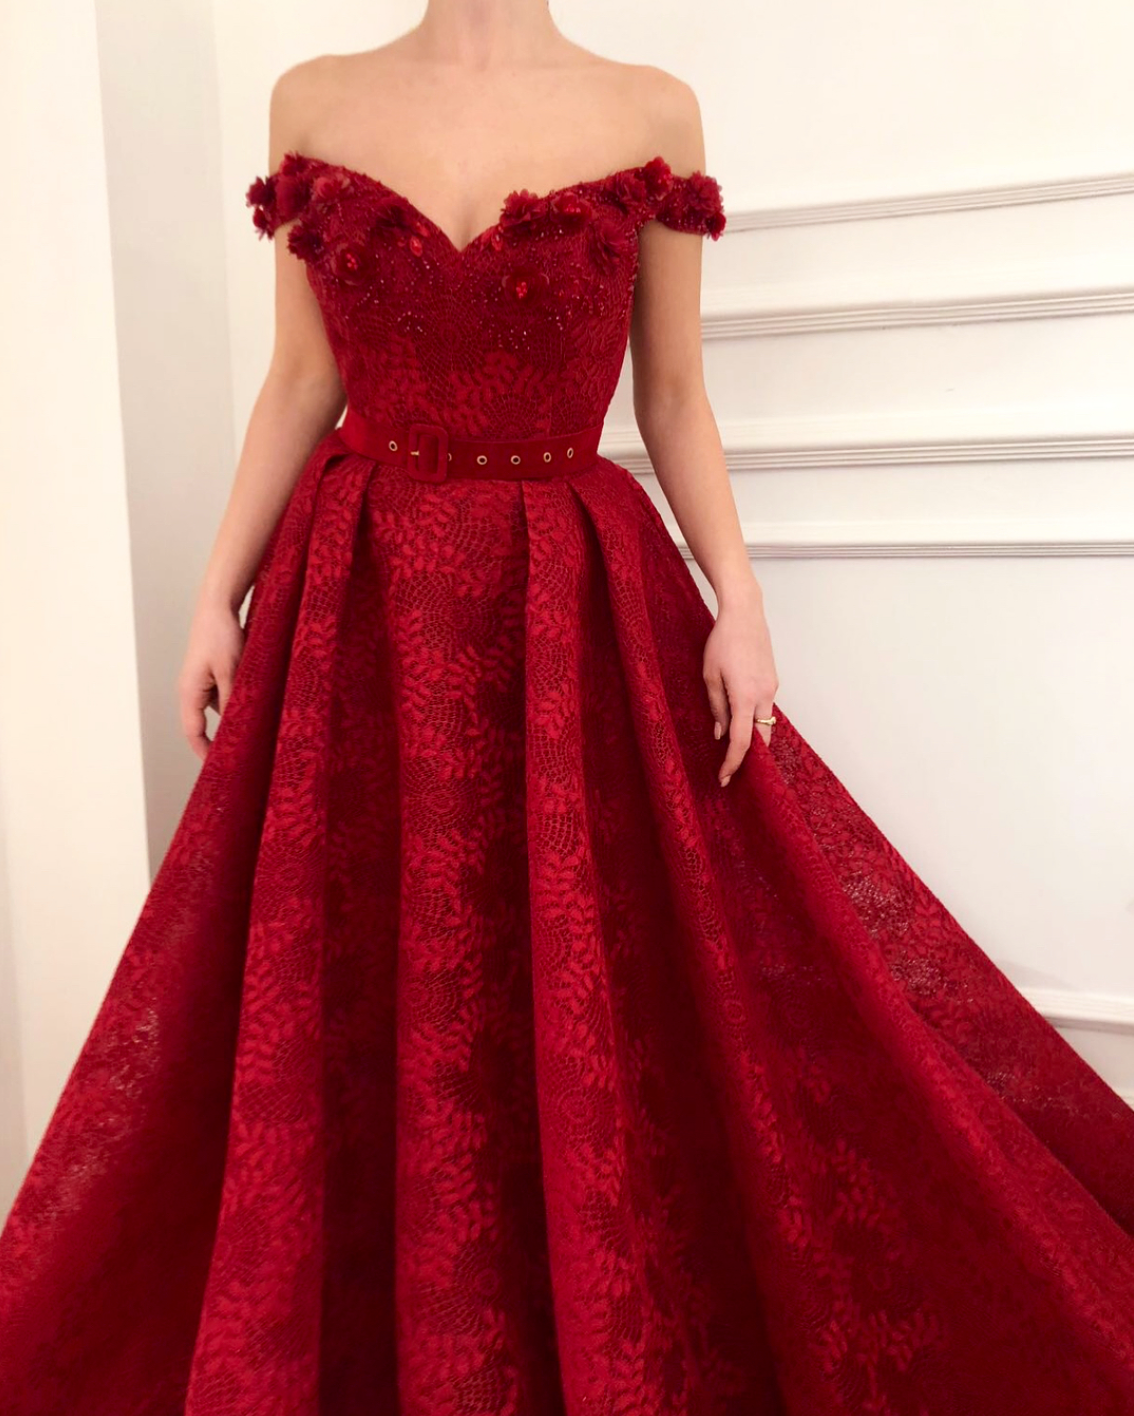 Red A-Line dress with belt, off the shoulder sleeves and embroidery